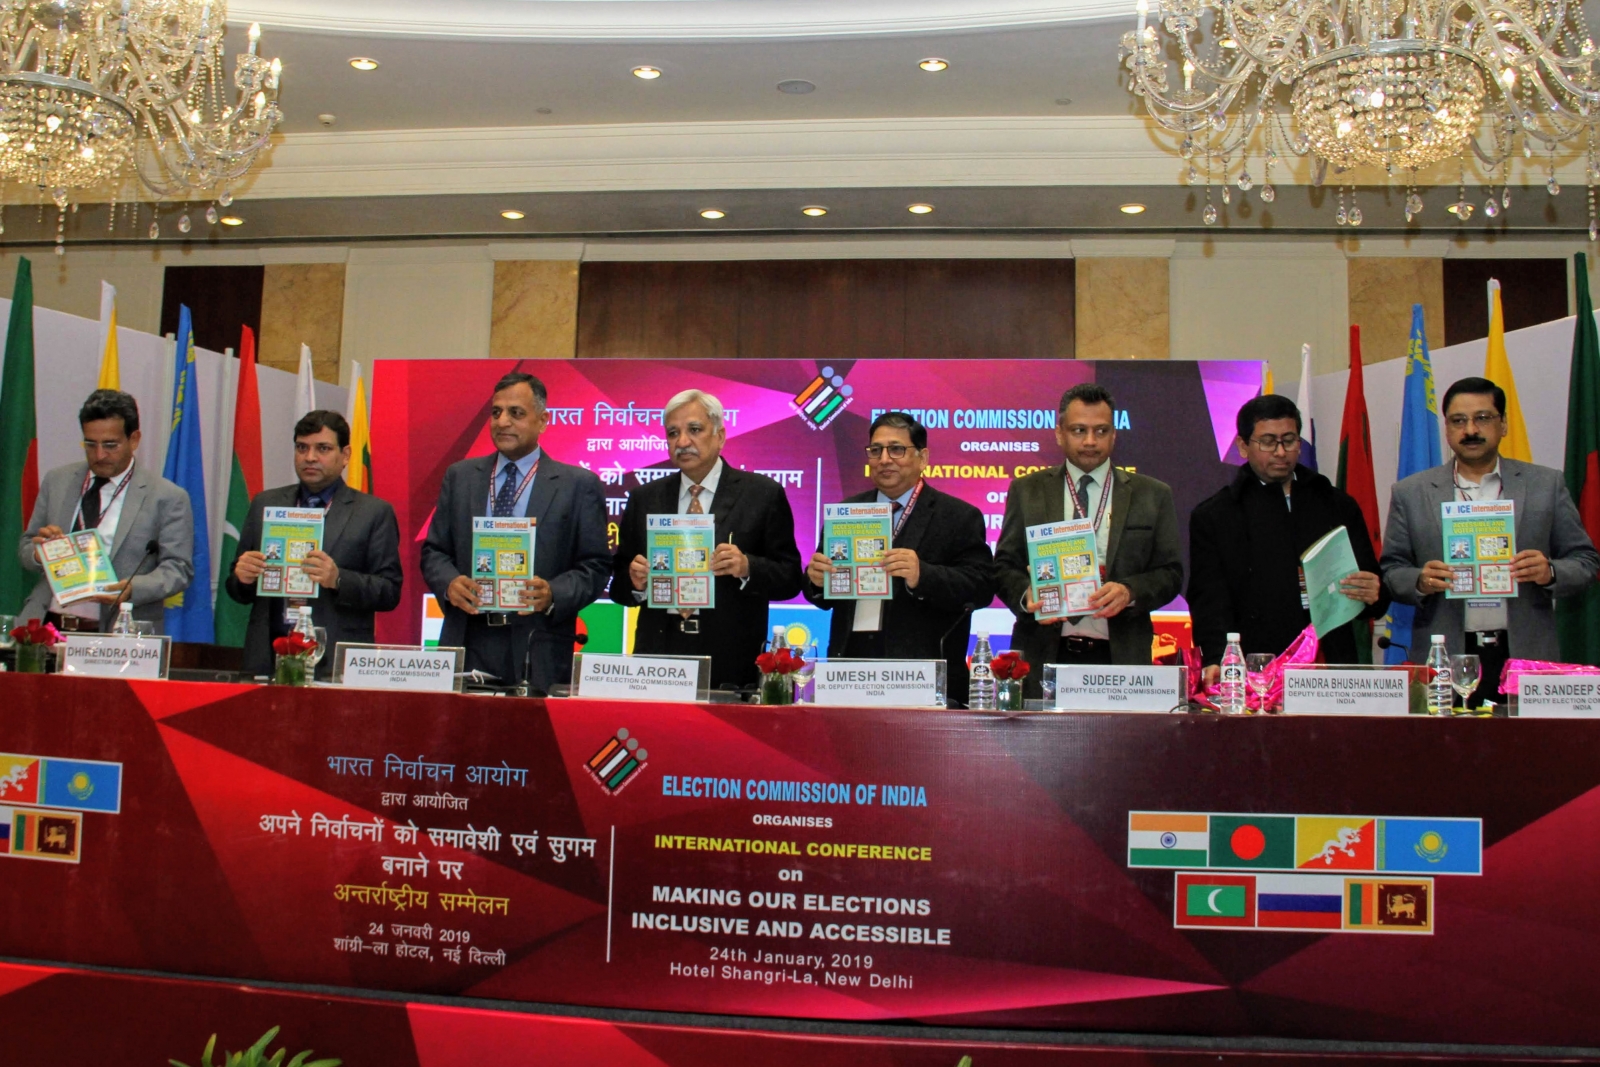 CEC Sunil Arora launches the 7th Edition of VoICE International Magazine at the International Conference on Inclusive and Accessible Elections on 24th January 2019